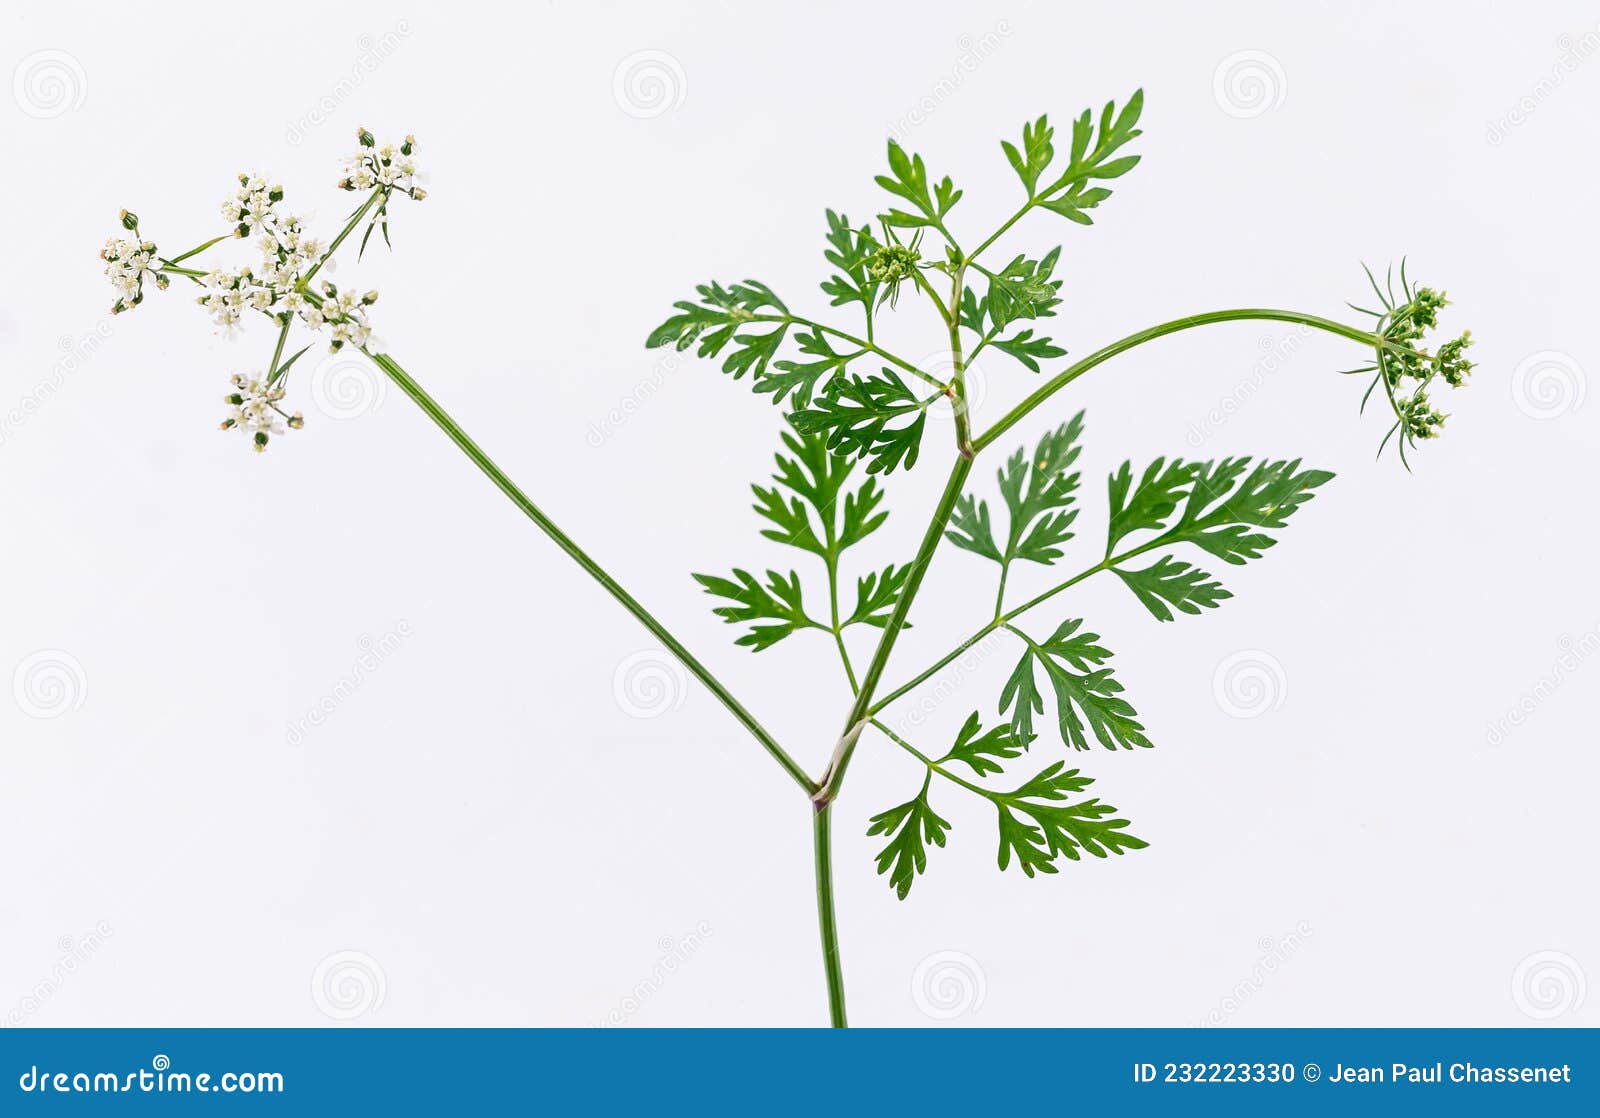 Stained Cigue Conium Maculatum Very Plant Stock Photo Image of background: 232223330